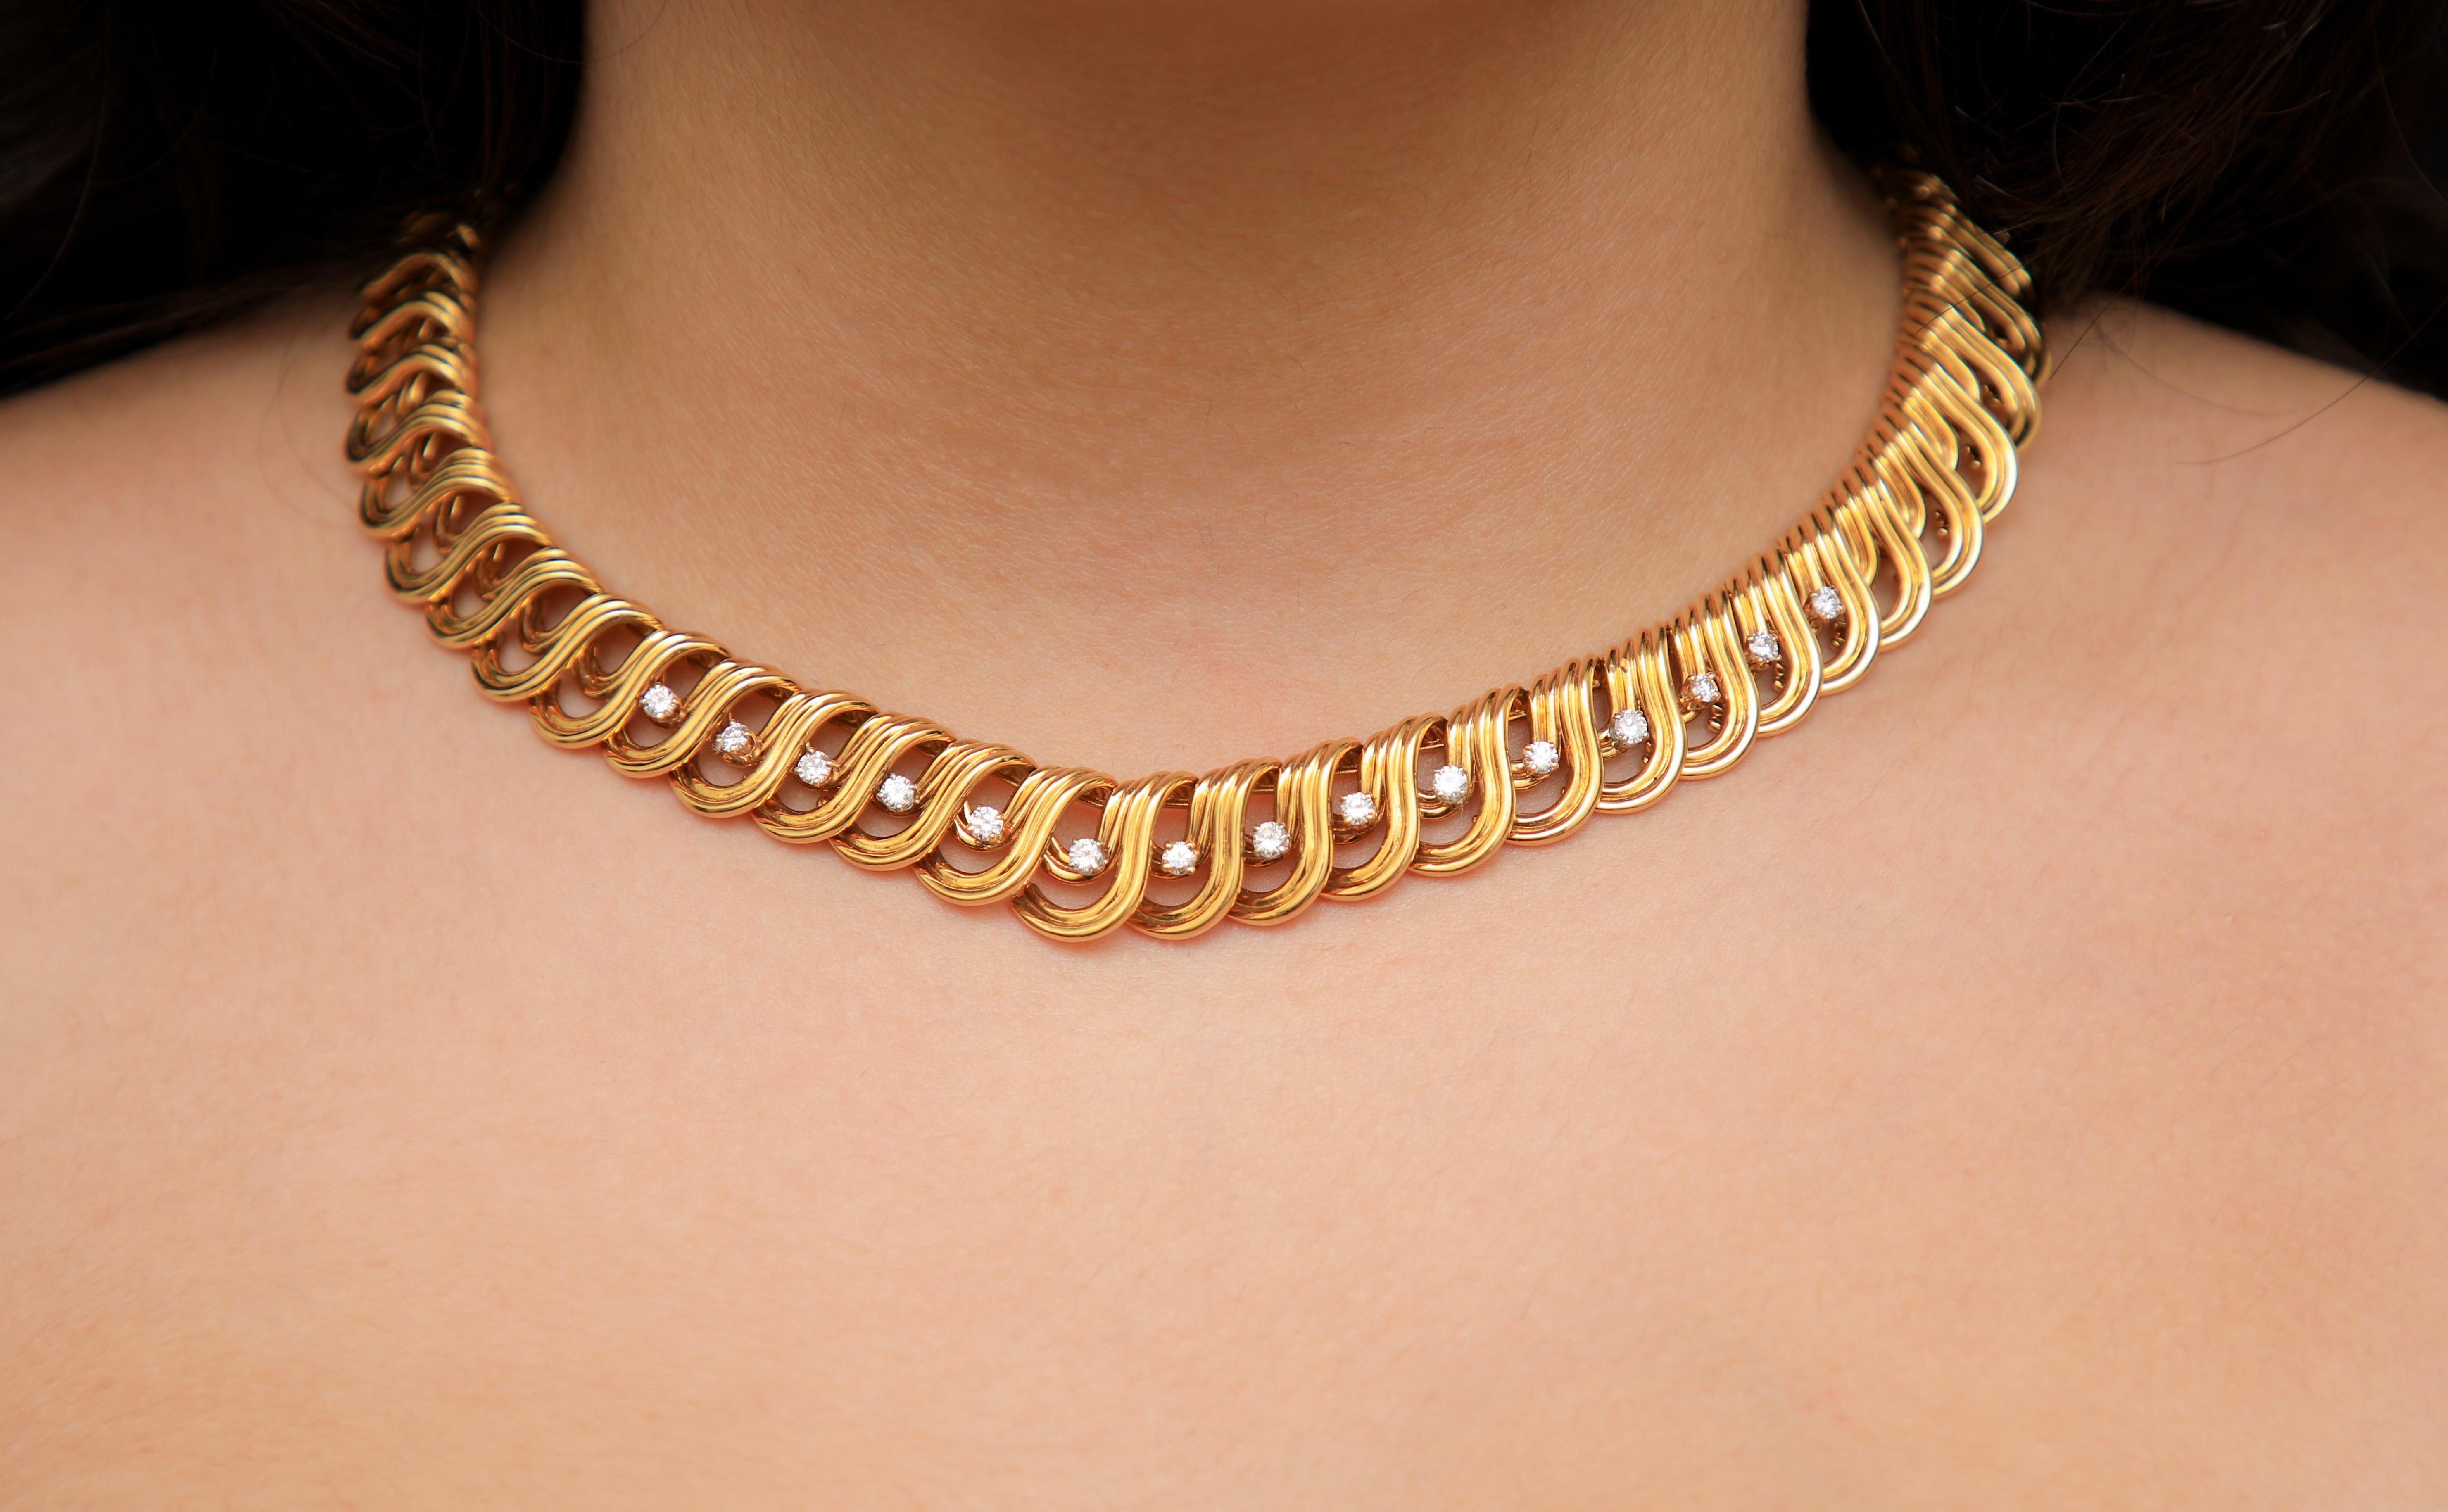 Solid 18 Karat Gold Link and 1.50 Carat Diamond Collar Necklace
Vintage Mid-Century solid 18k yellow gold link collar necklace. This flattering piece portrays a wave pattern. The gorgeous piece is made in the 1960's and covers the era's bold look.